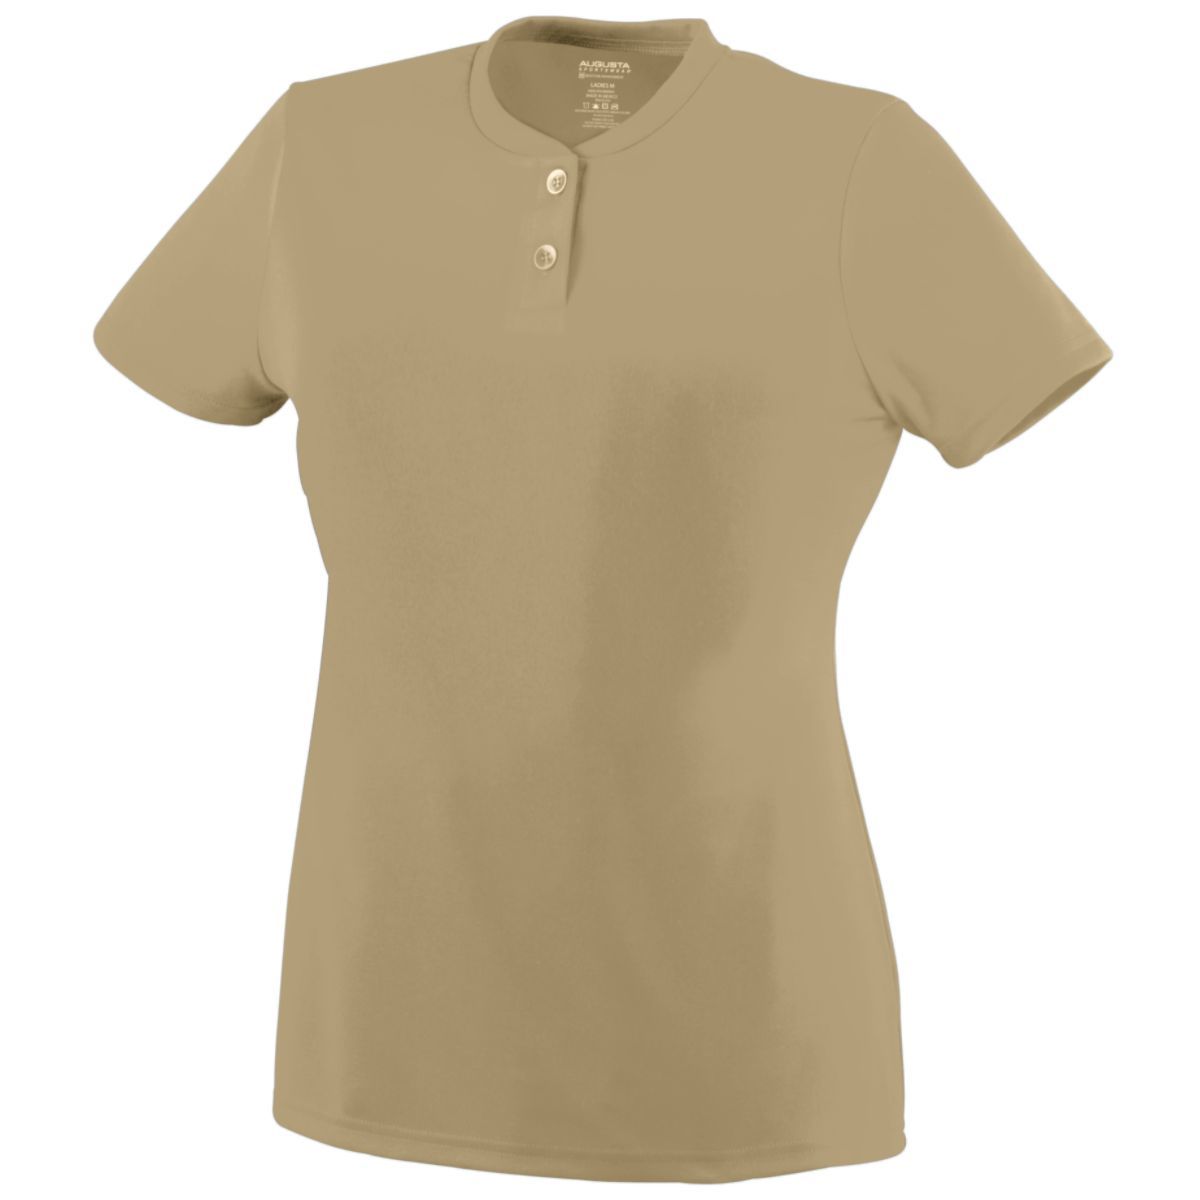 LADIES WICKING TWO-BUTTON JERSEY - Apparel Globe